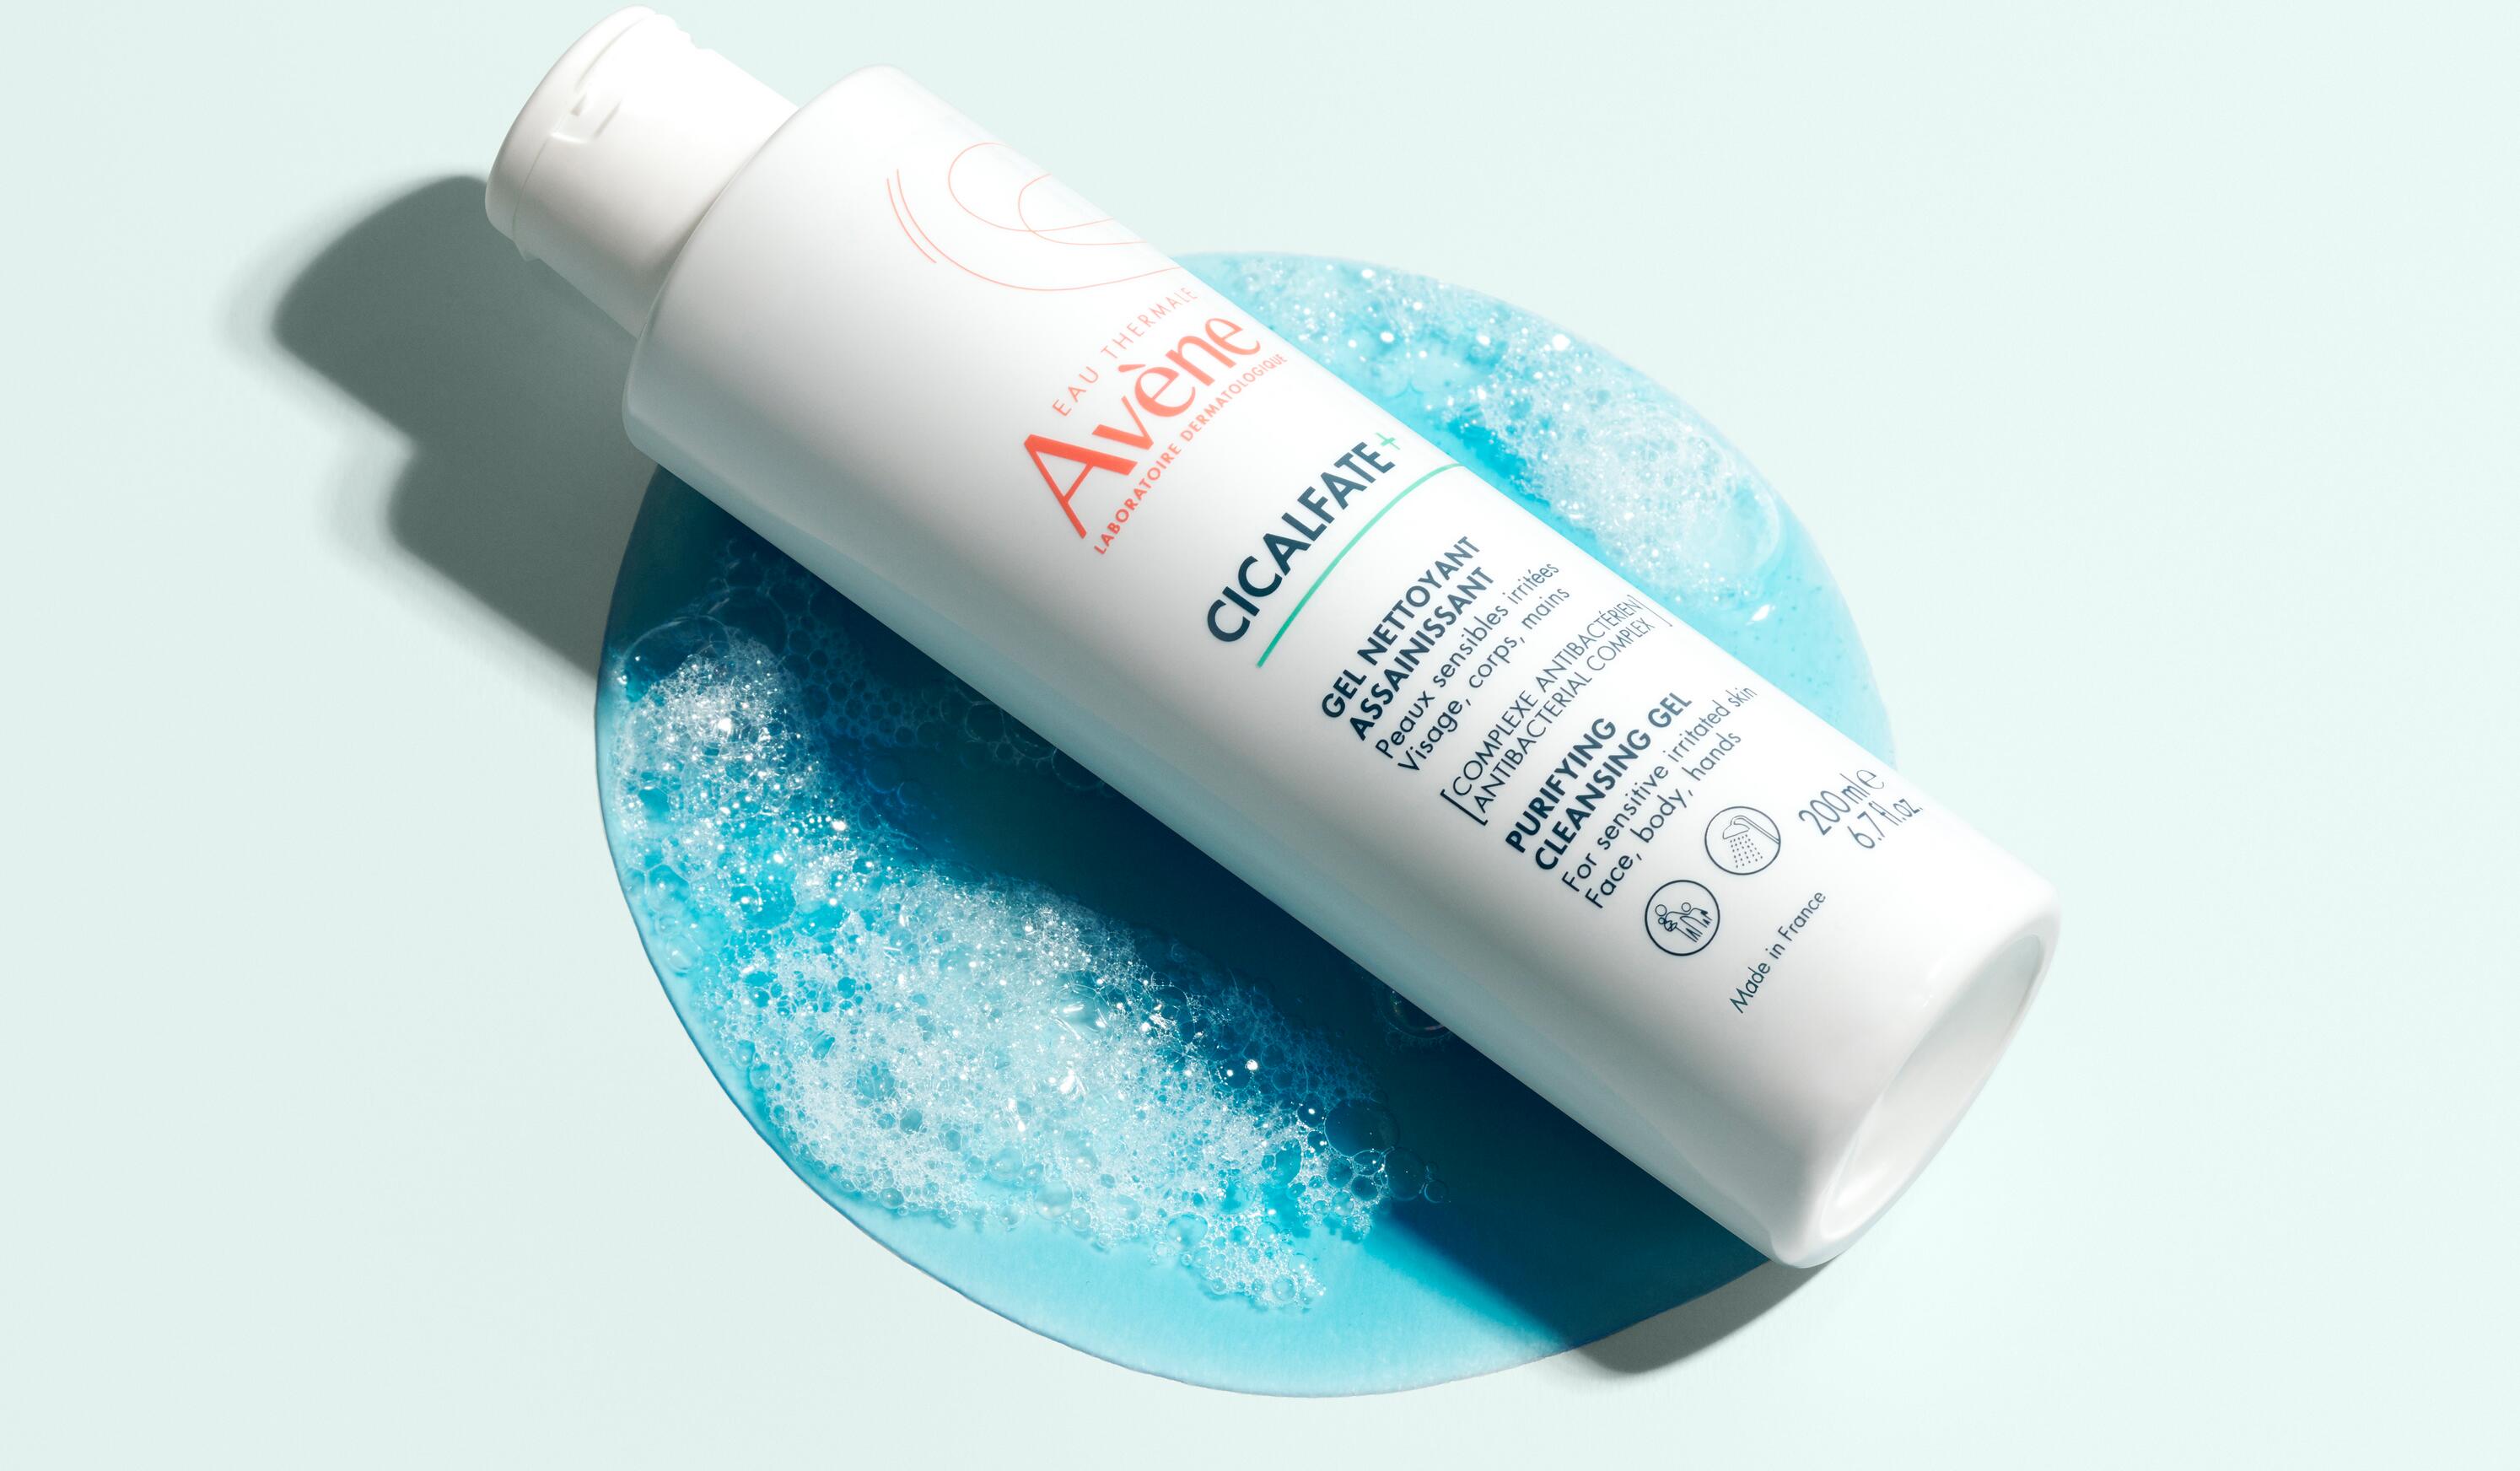 Cicalfate+ Purifying cleansing gel